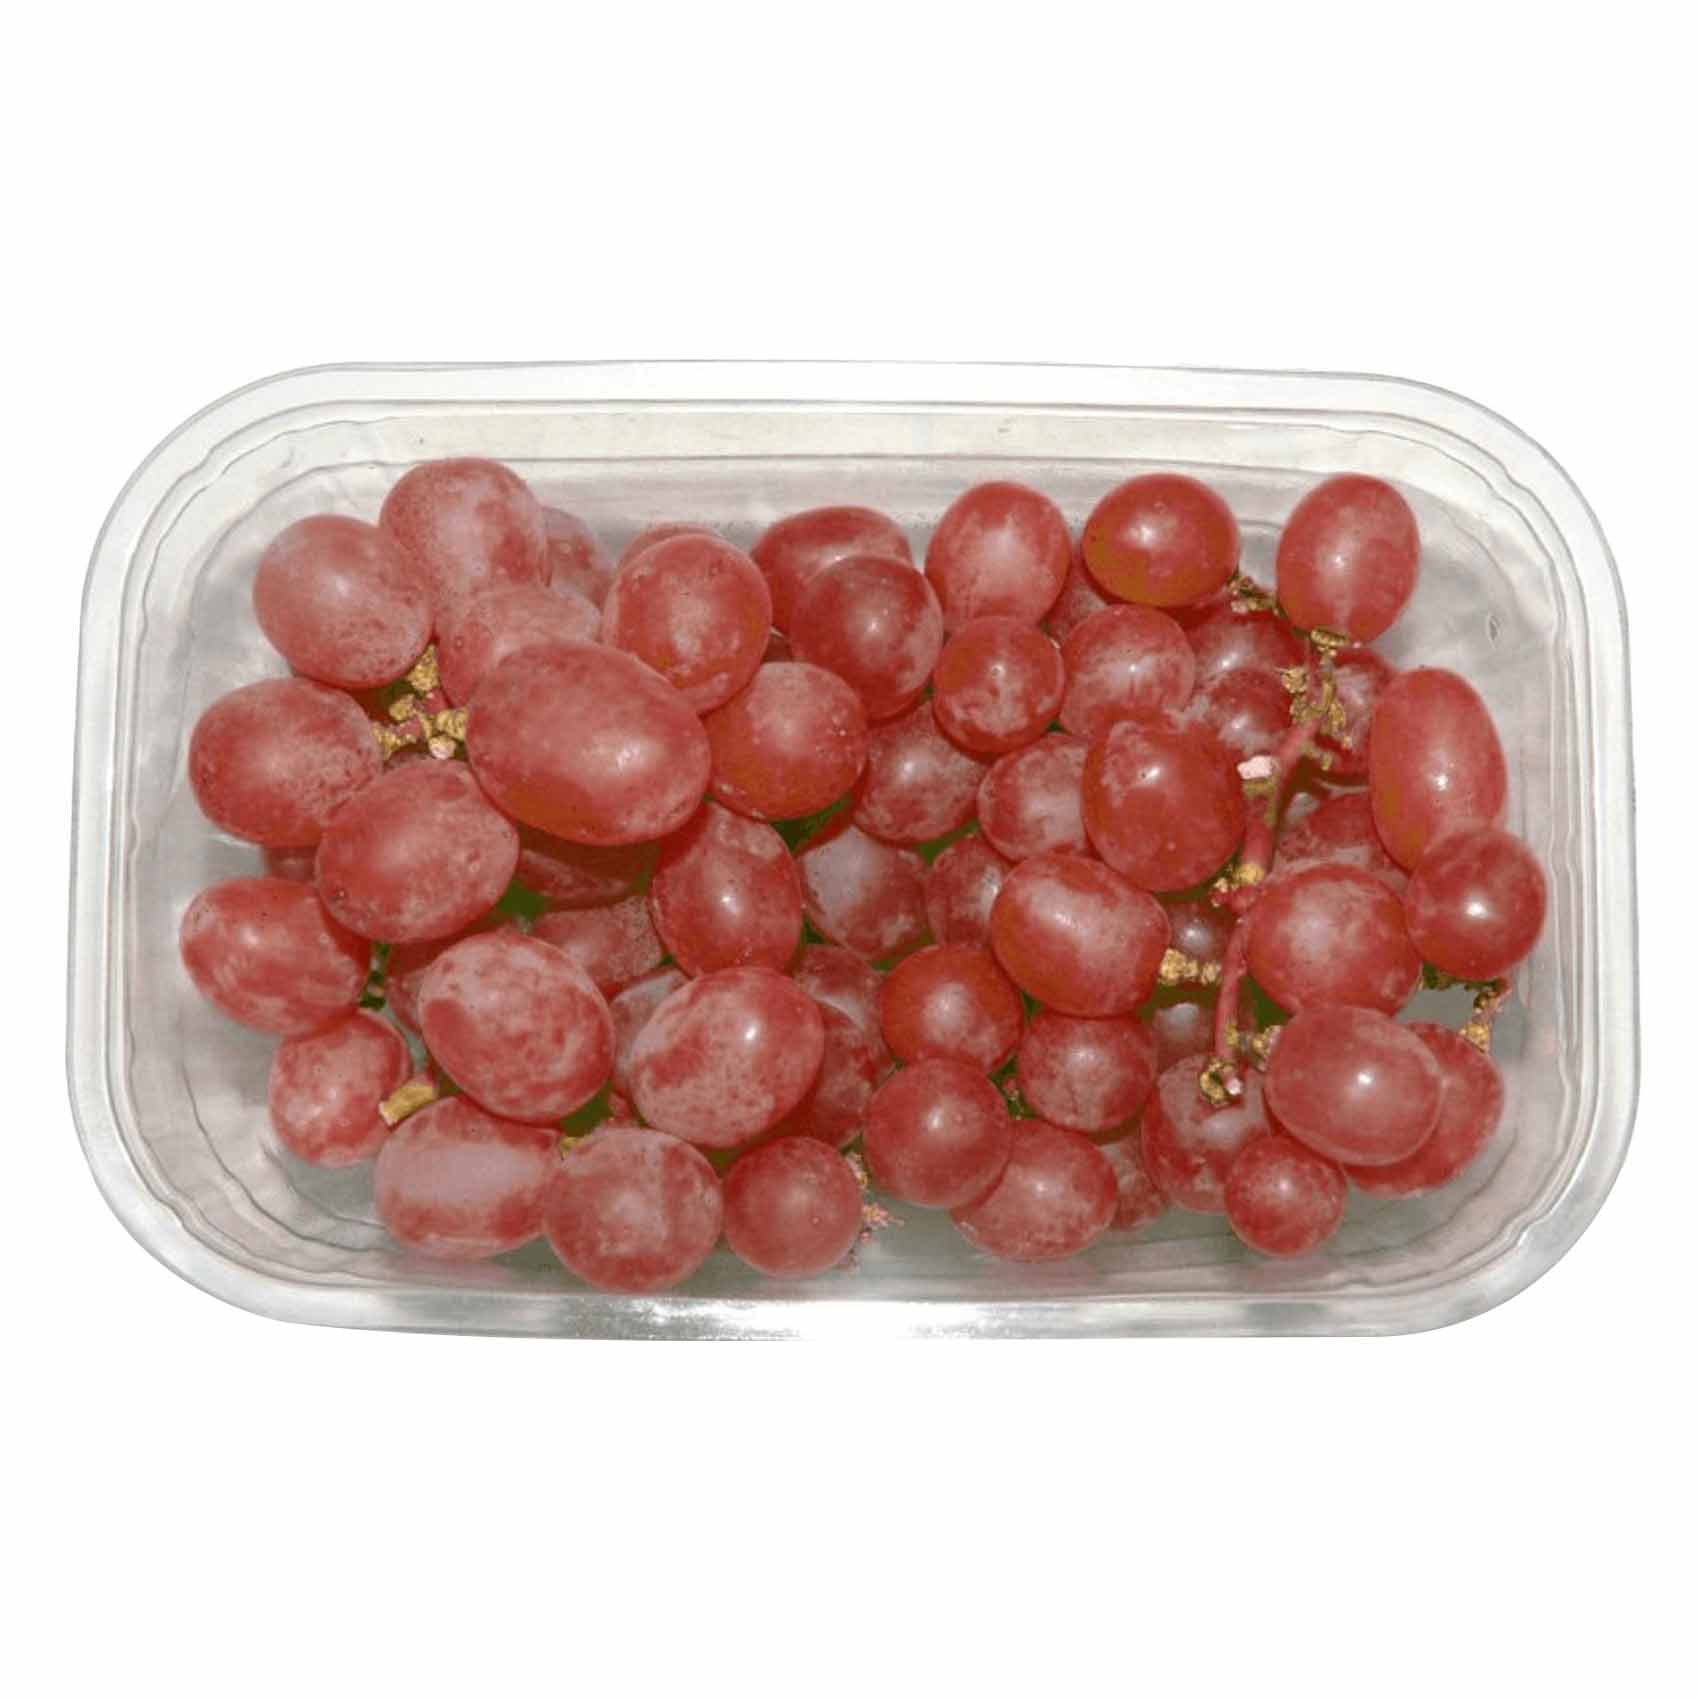 Red Grapes Pack